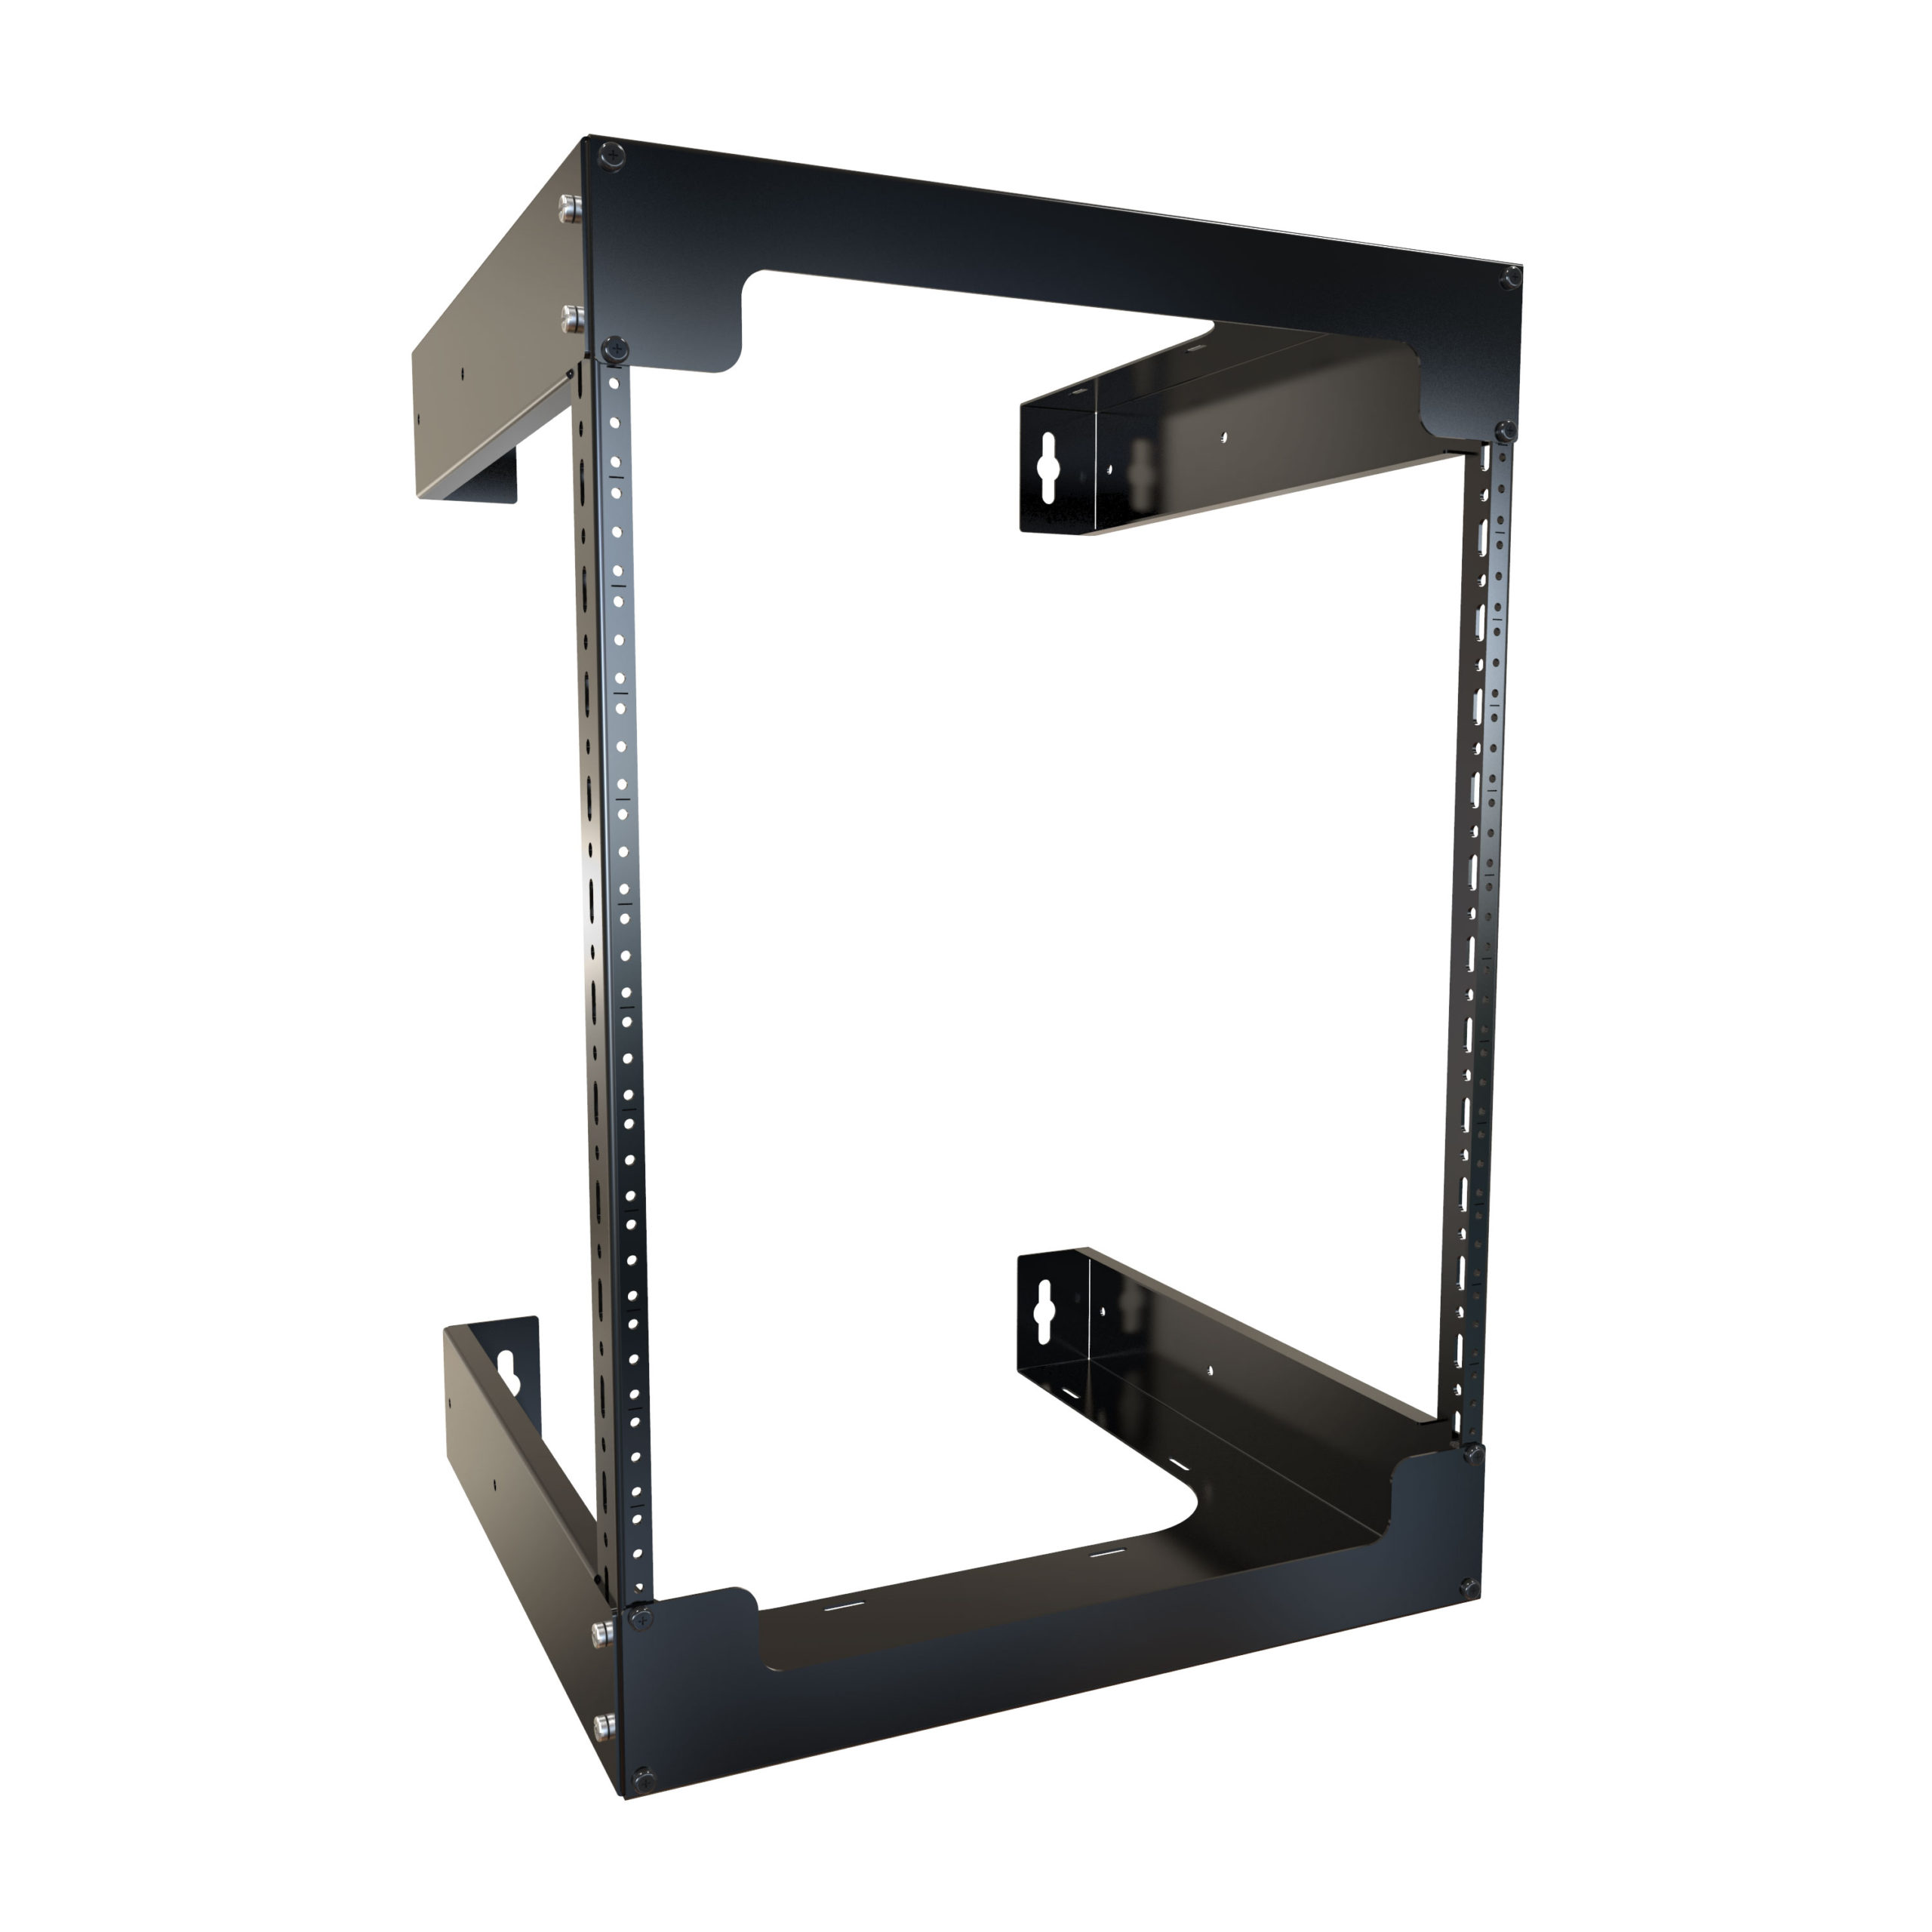 RB-2PW12 – 12U Open Frame Wall Rack 18″D Image